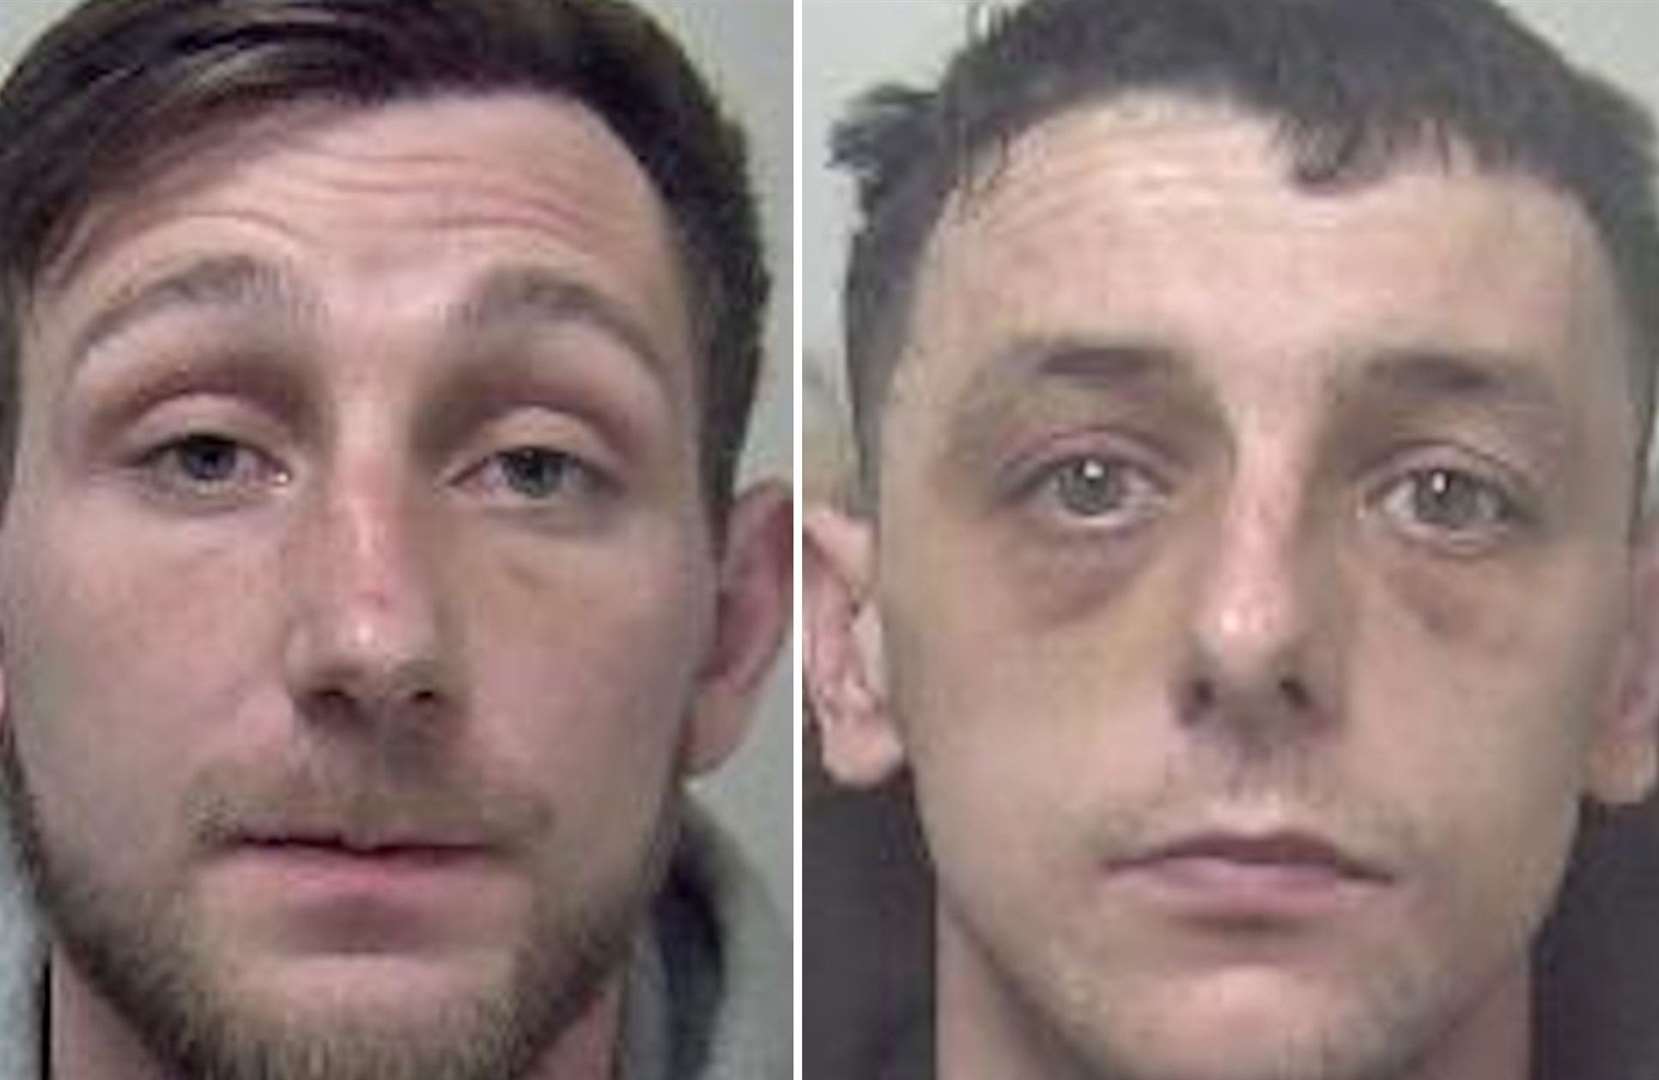 John Hazelgrove and Patrick Holmes were jailed following an attack outside Vivid nightclub in Herne Bay. Picture: Kent Police